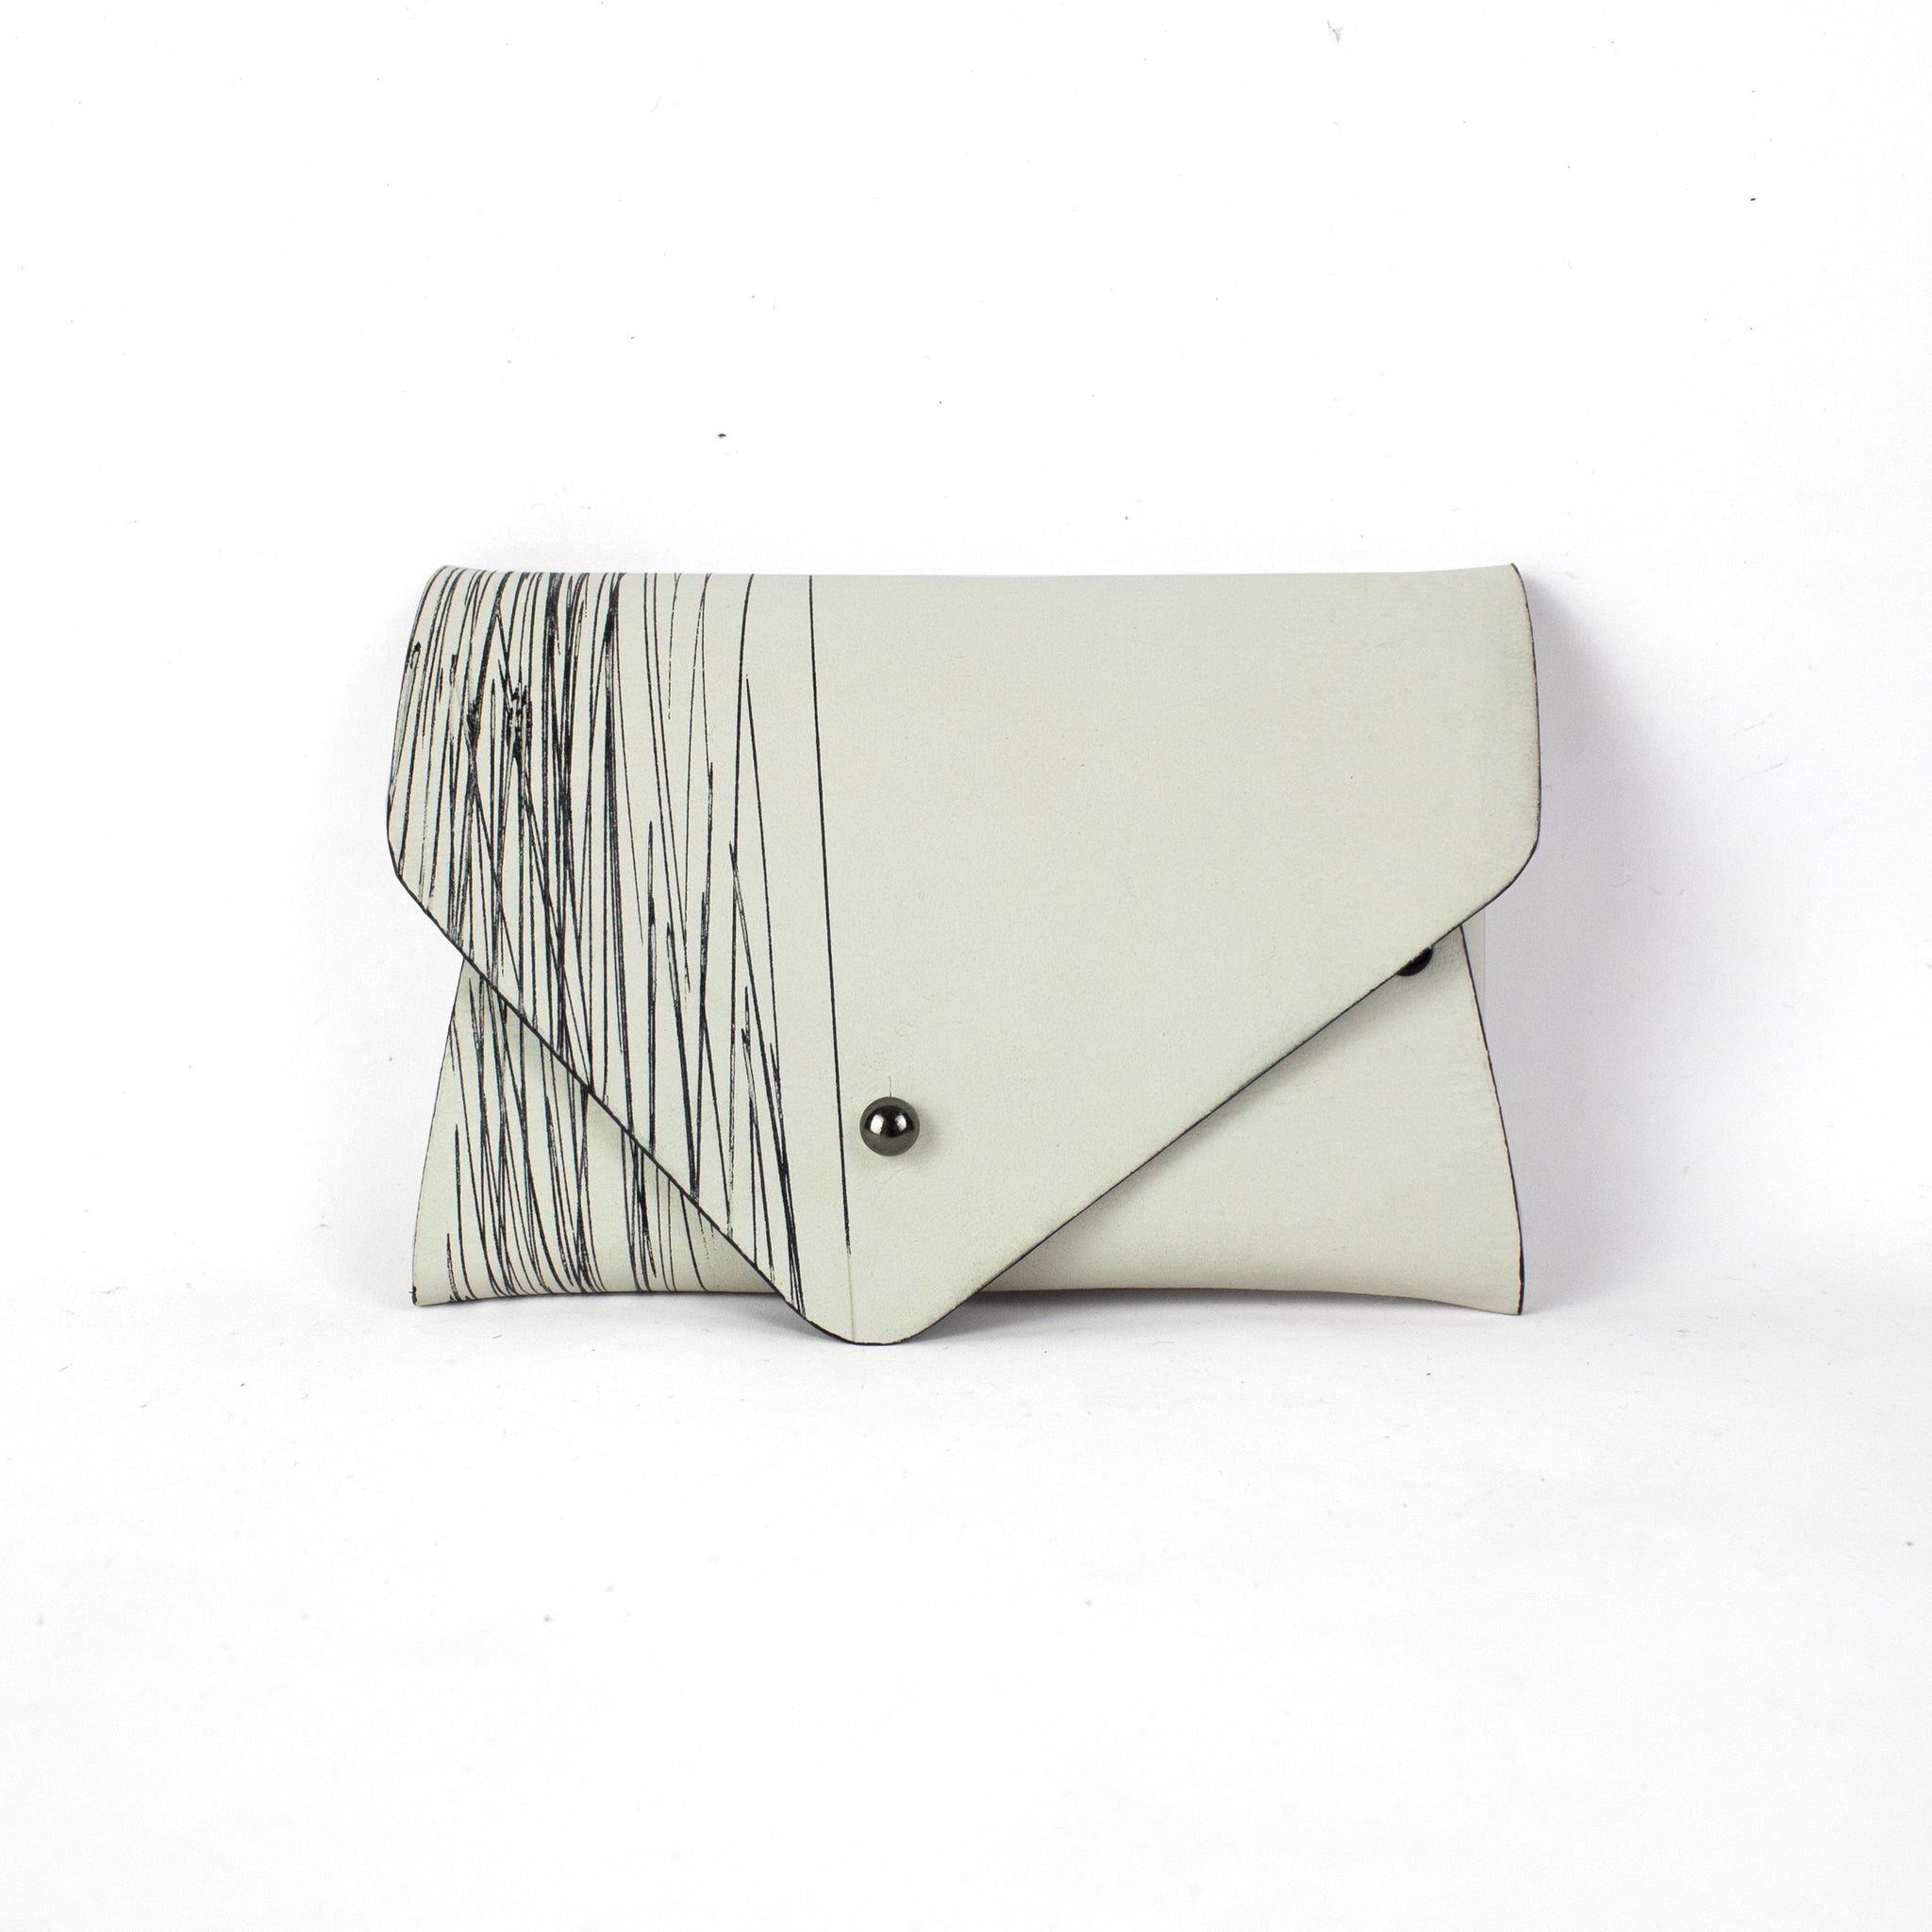 Card holder / coin purse beige and black